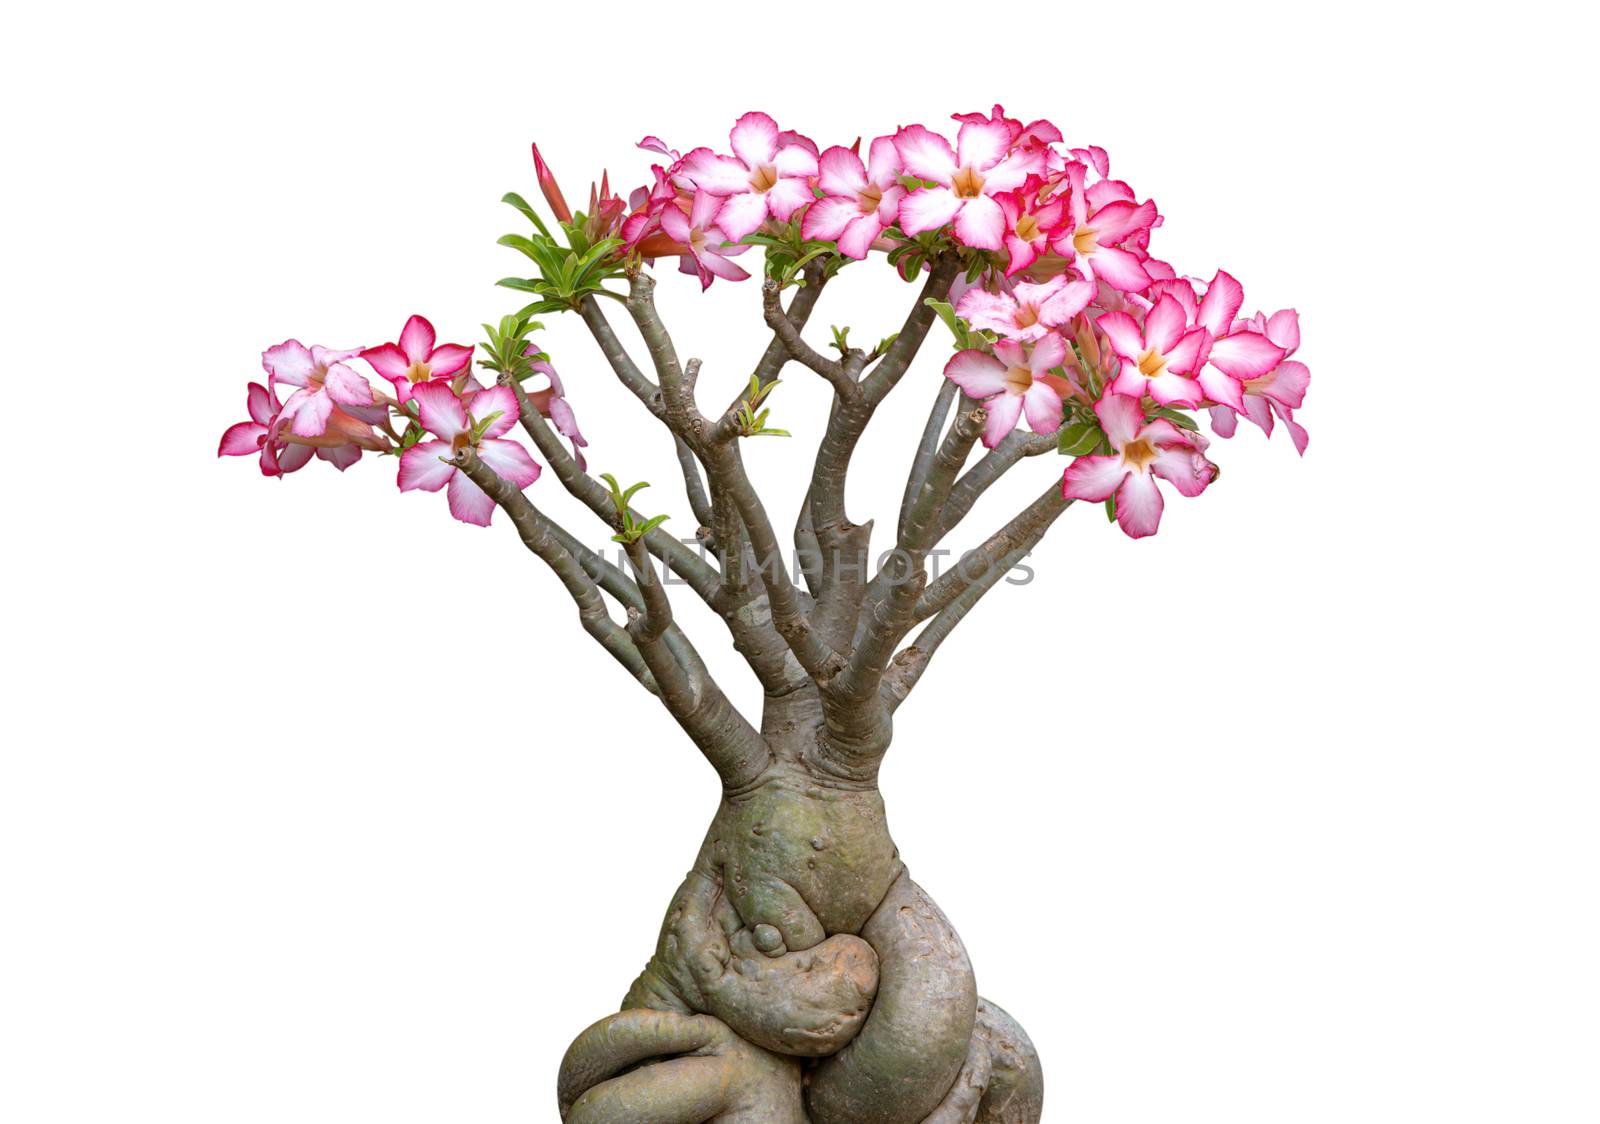 Pink flower Adenium Obesum plant with green leaves in pot isolat by pt.pongsak@gmail.com